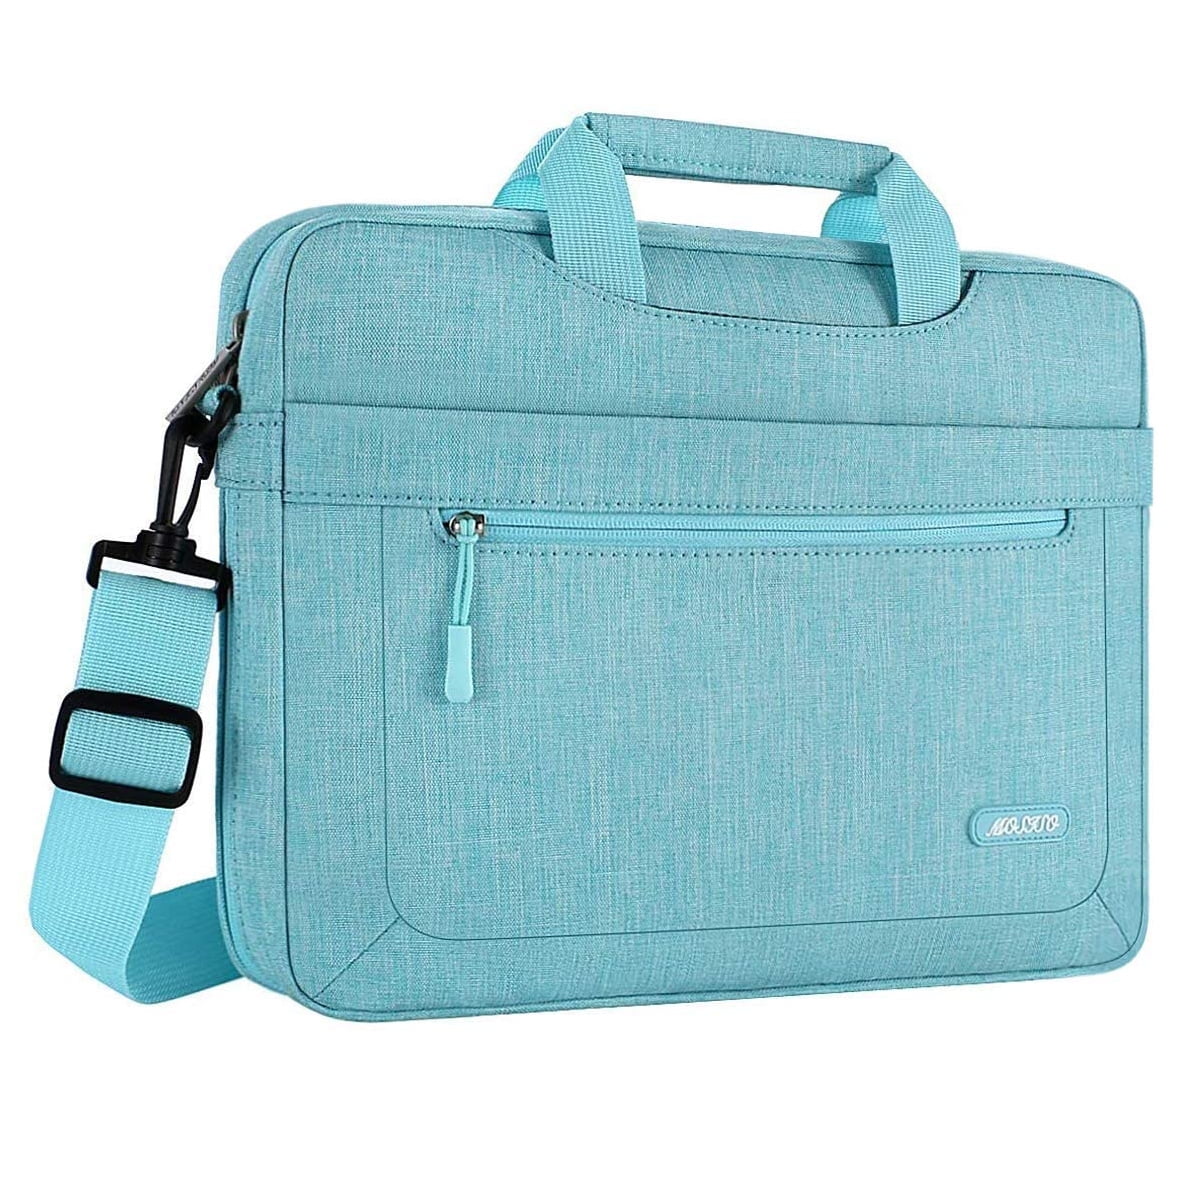 MOSISO Laptop Briefcase Handbag Compatible 13-13.3 Inch MacBook Air MacBook Pro Notebook Computer Sky Blue Polyester Multifunctional Carrying Sleeve Case Cover Bag 